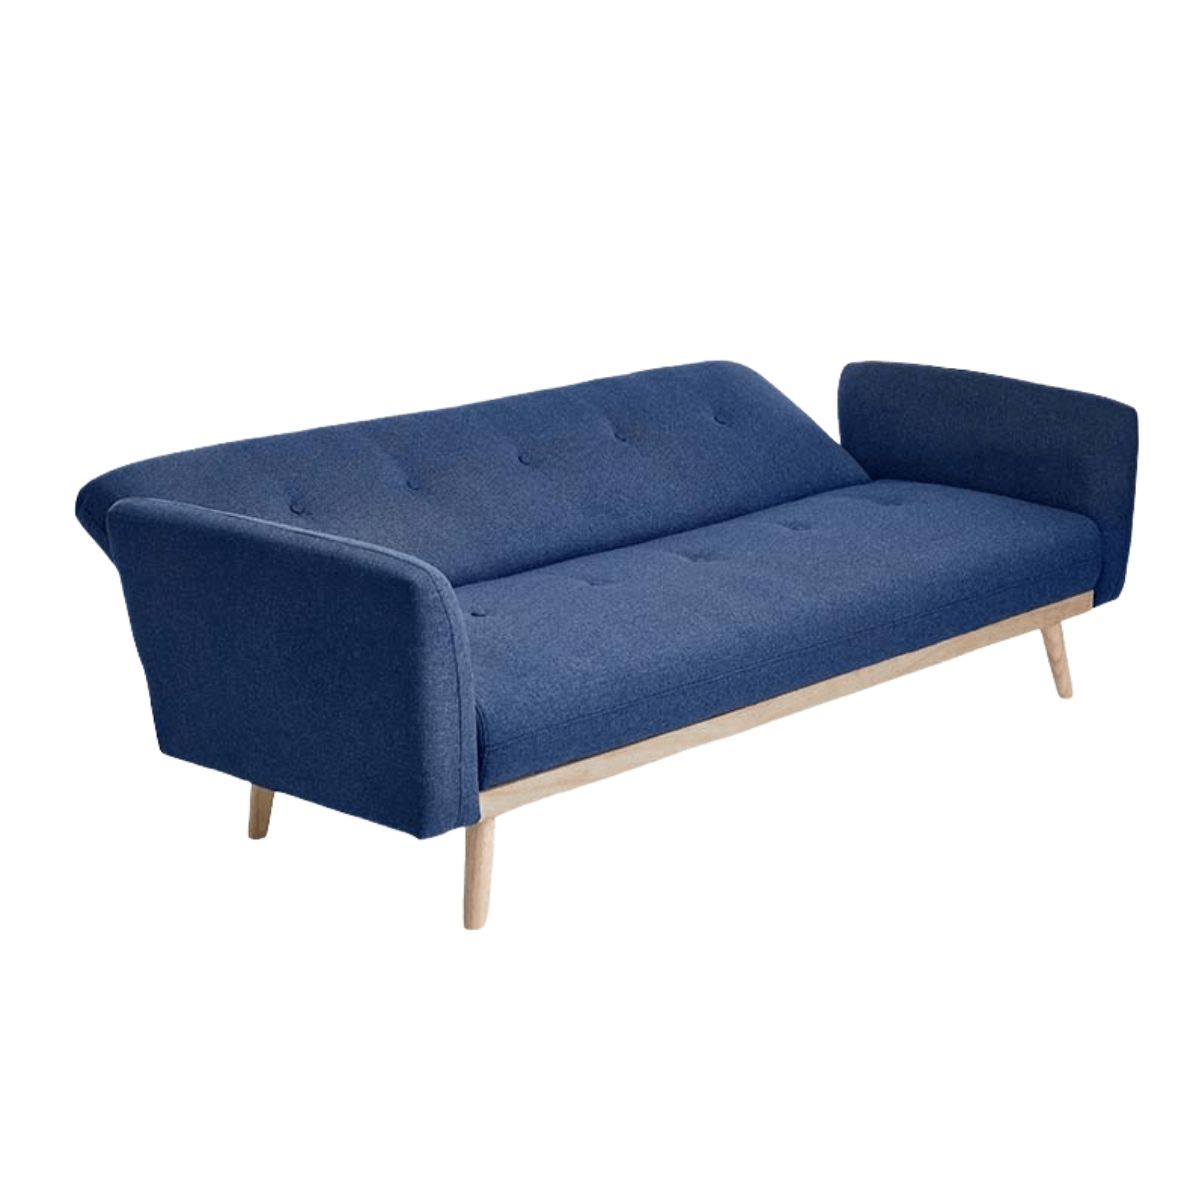 Fatherday-furniture 3-Seater Blue Foldable Sofa Bed